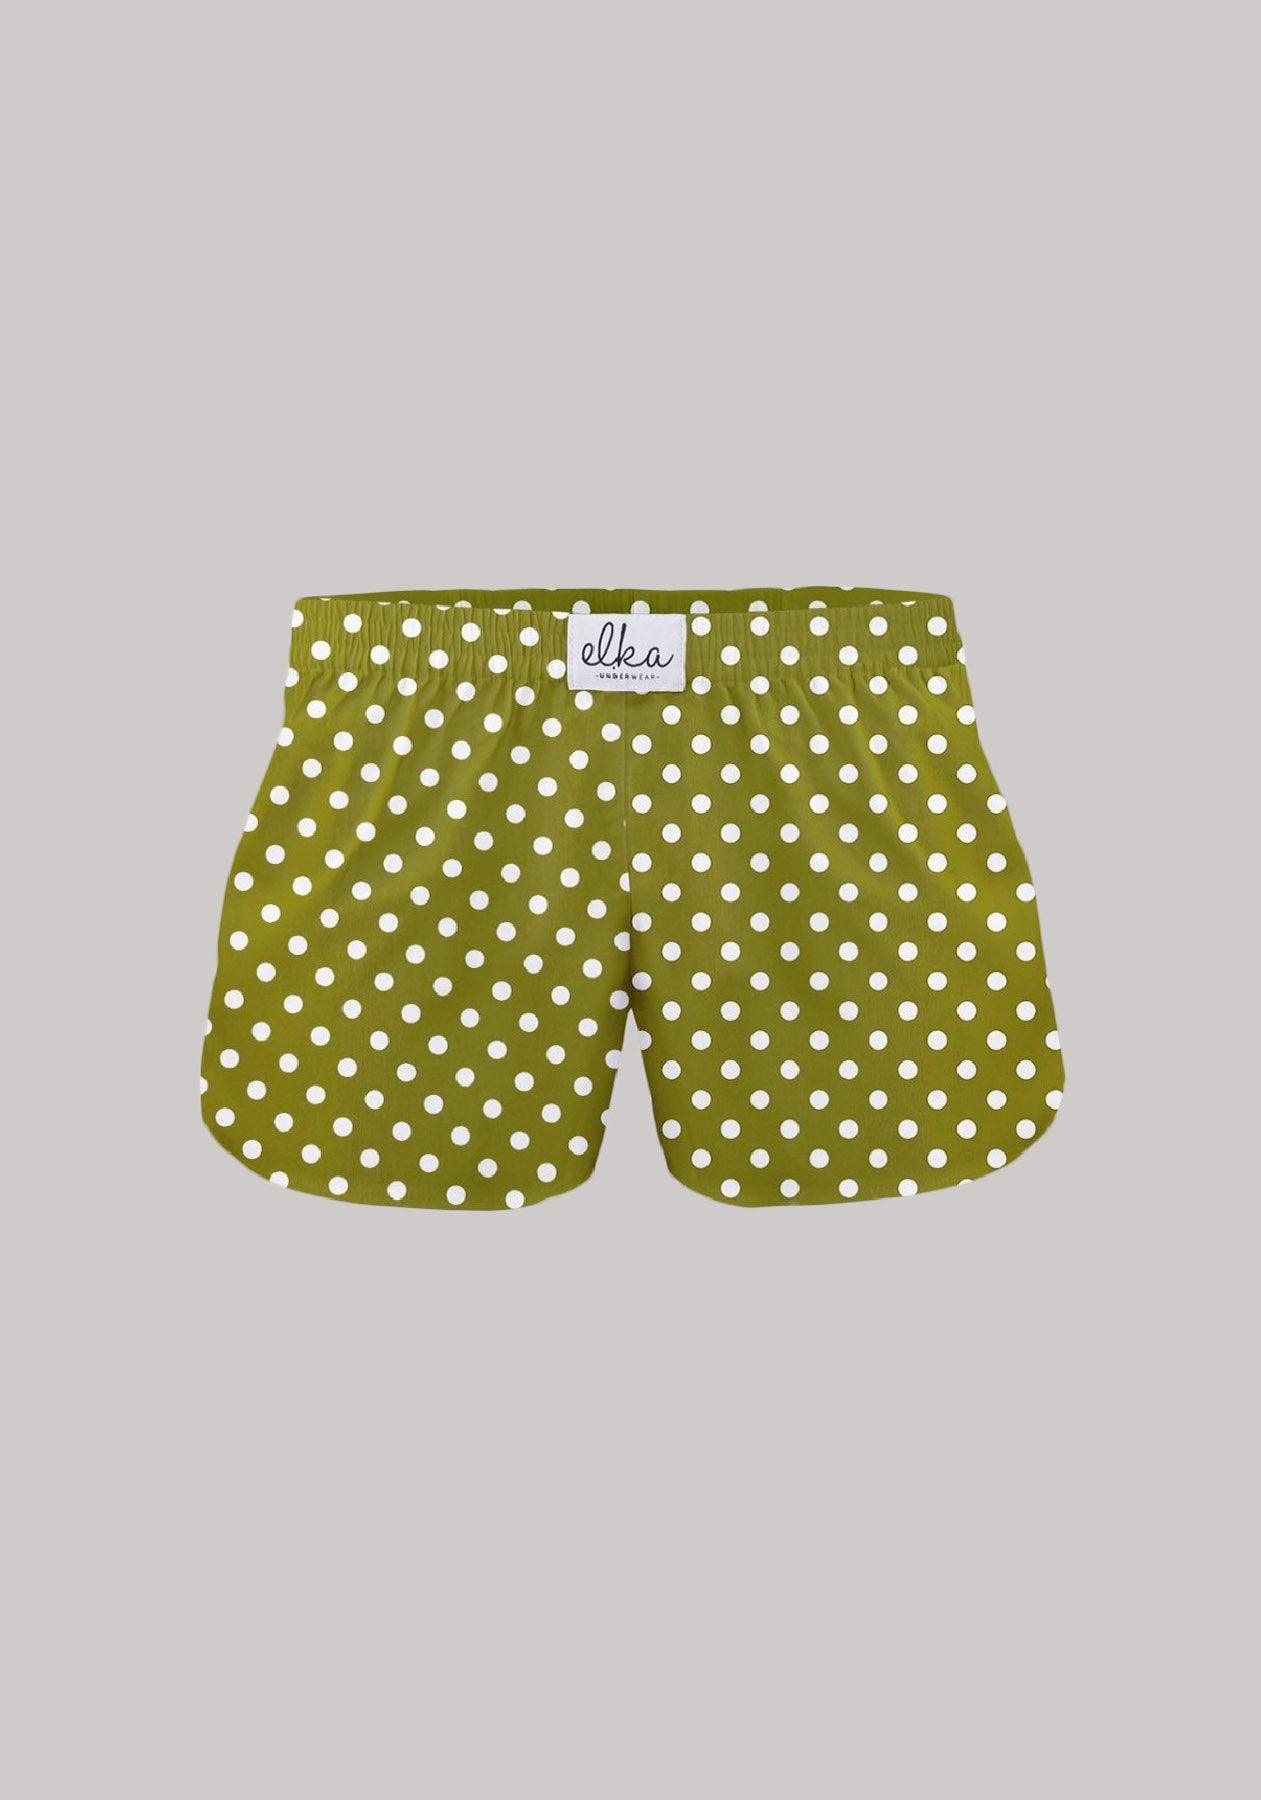 Women's shorts Olive with polka dots